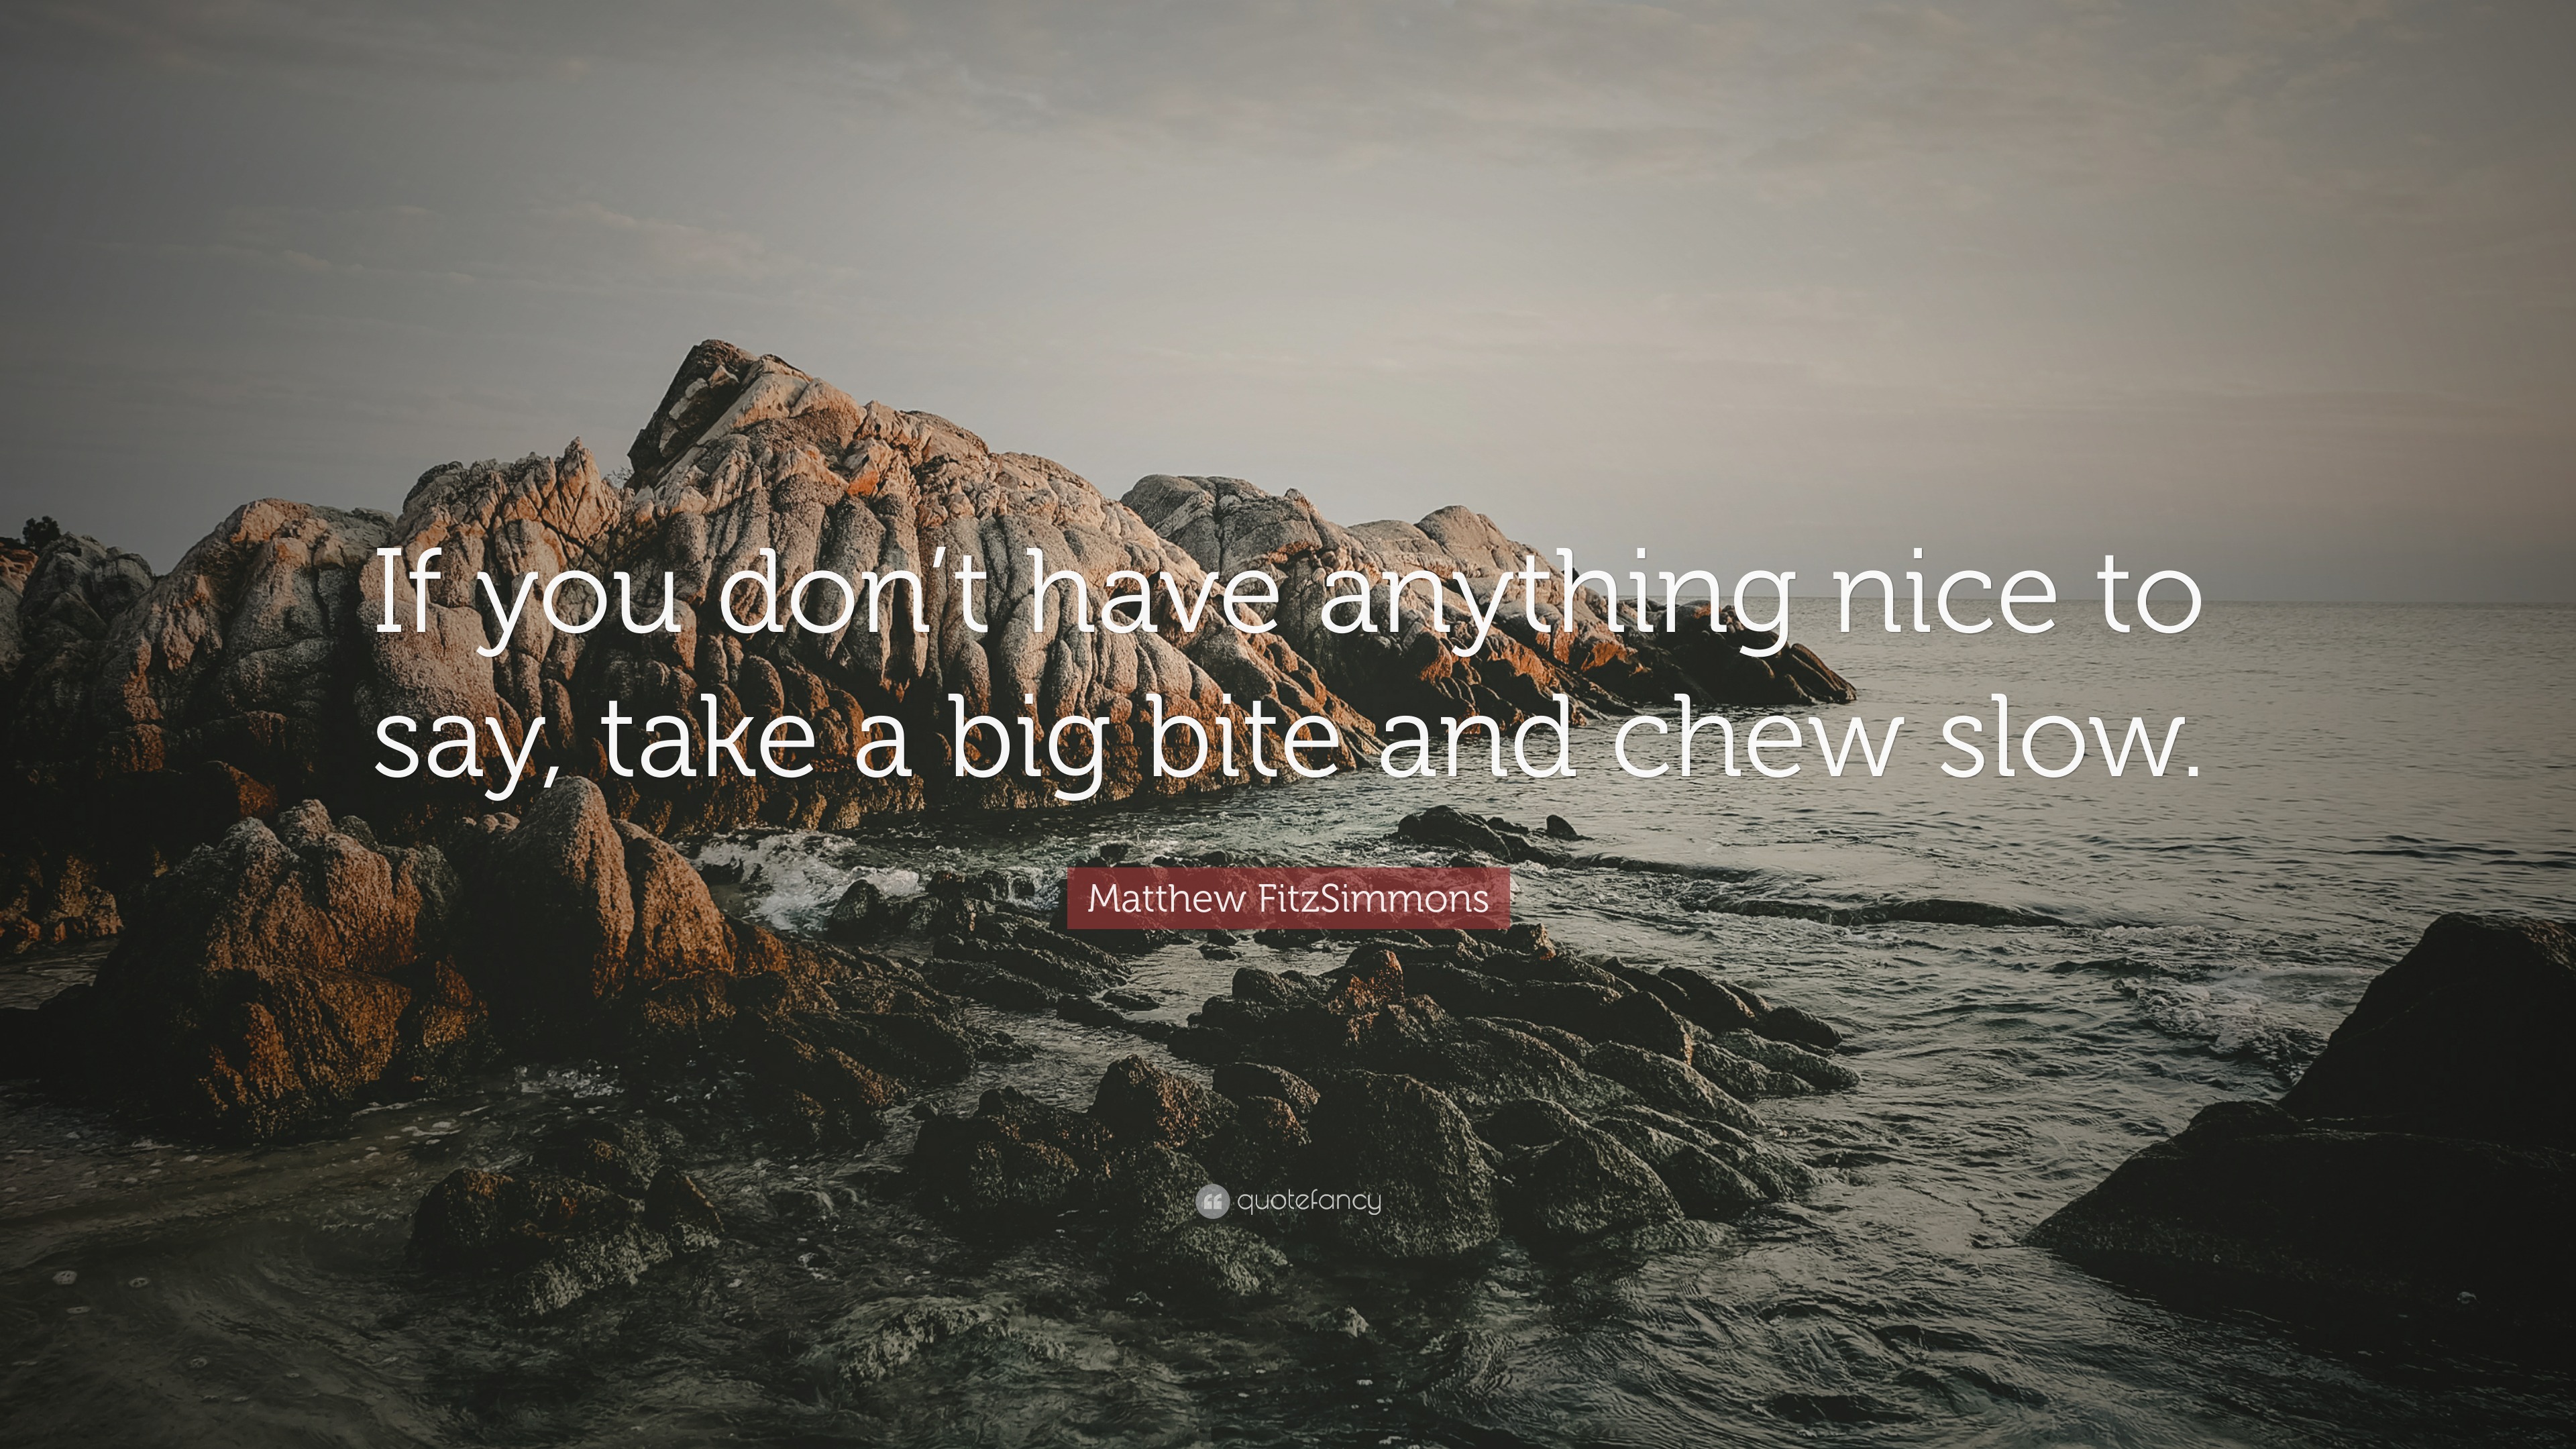 Matthew FitzSimmons Quote: “If you don't have anything nice to say